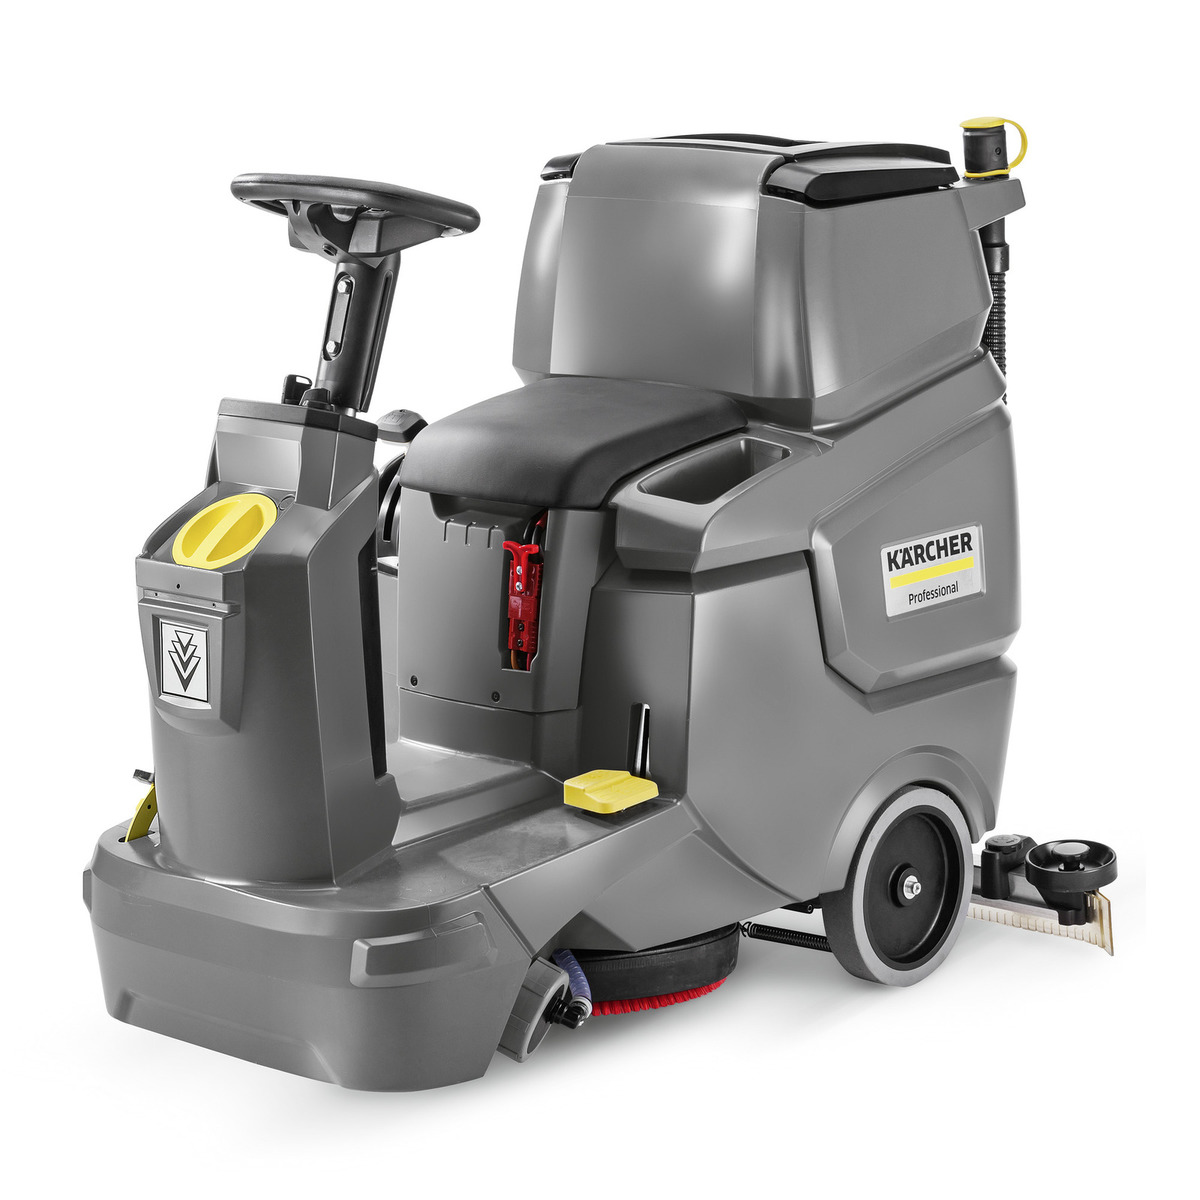 Karcher BD 50/70 R Bp Scrubber Karcher, BD, 50/70, R. BP, scrubber, auto-scrubber, floor, cleaning, machine, commercial, professional, ride-on, large-area, industrial, 